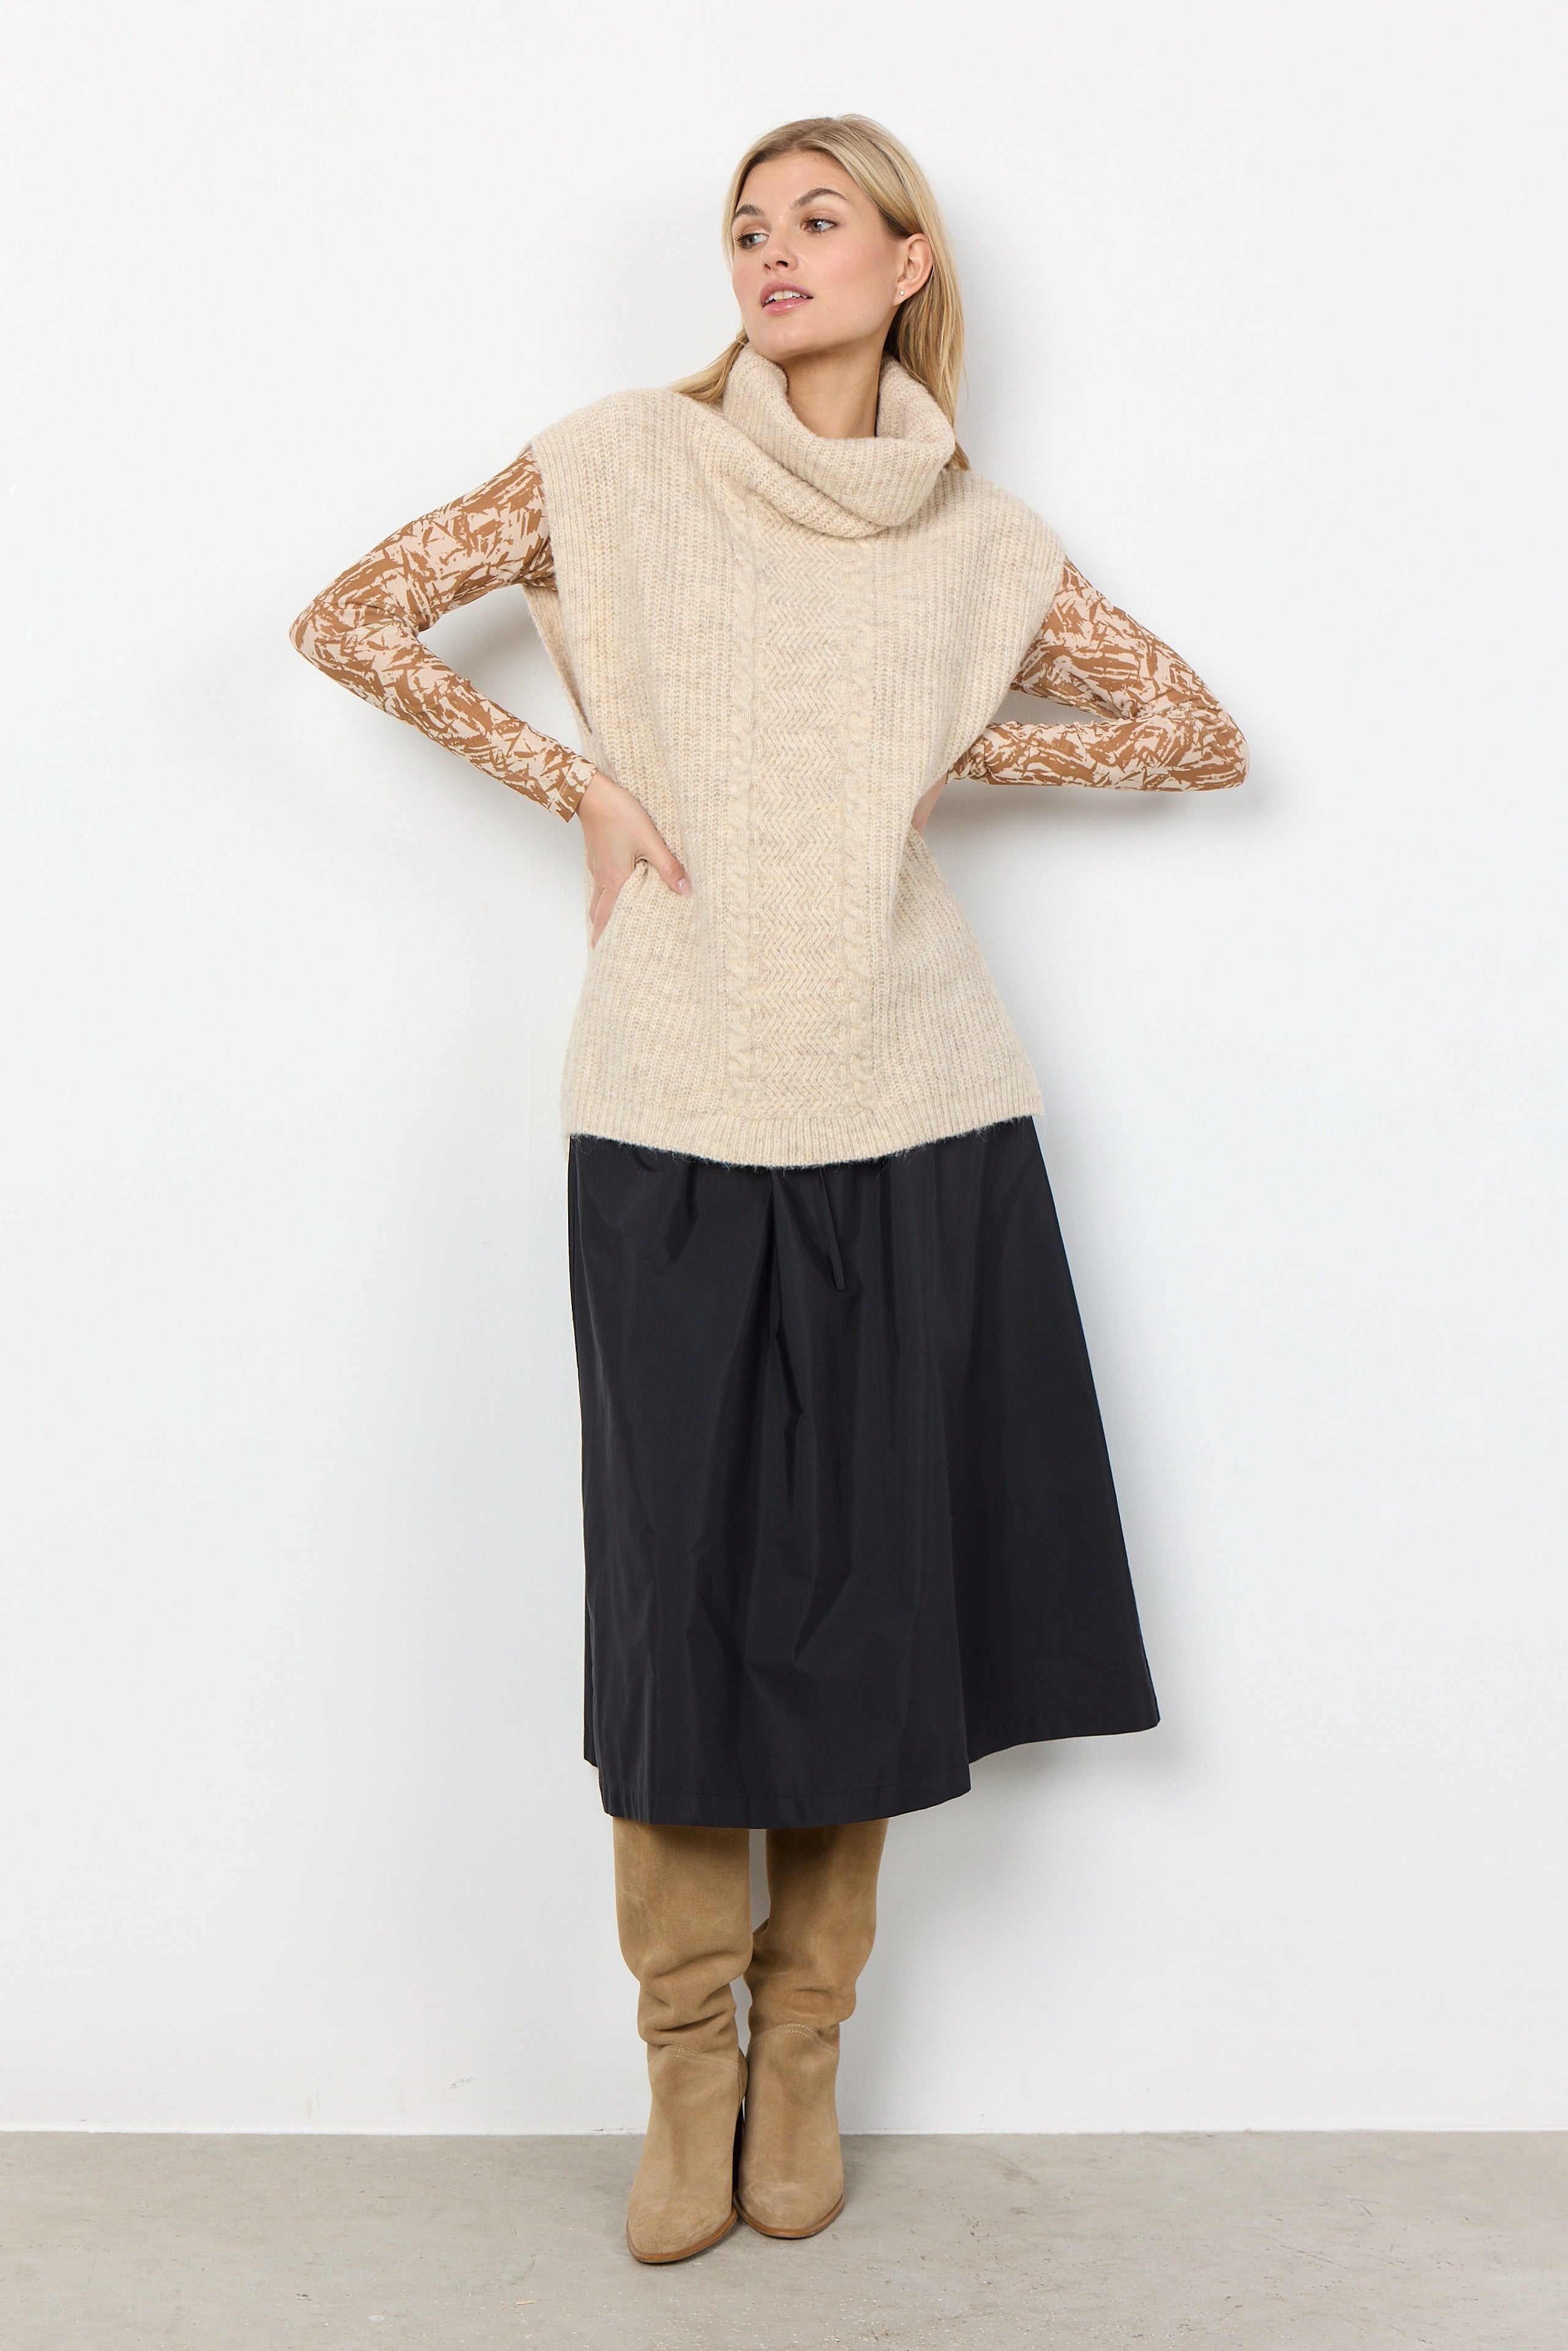 Soya Concept Knitted Poncho Cream